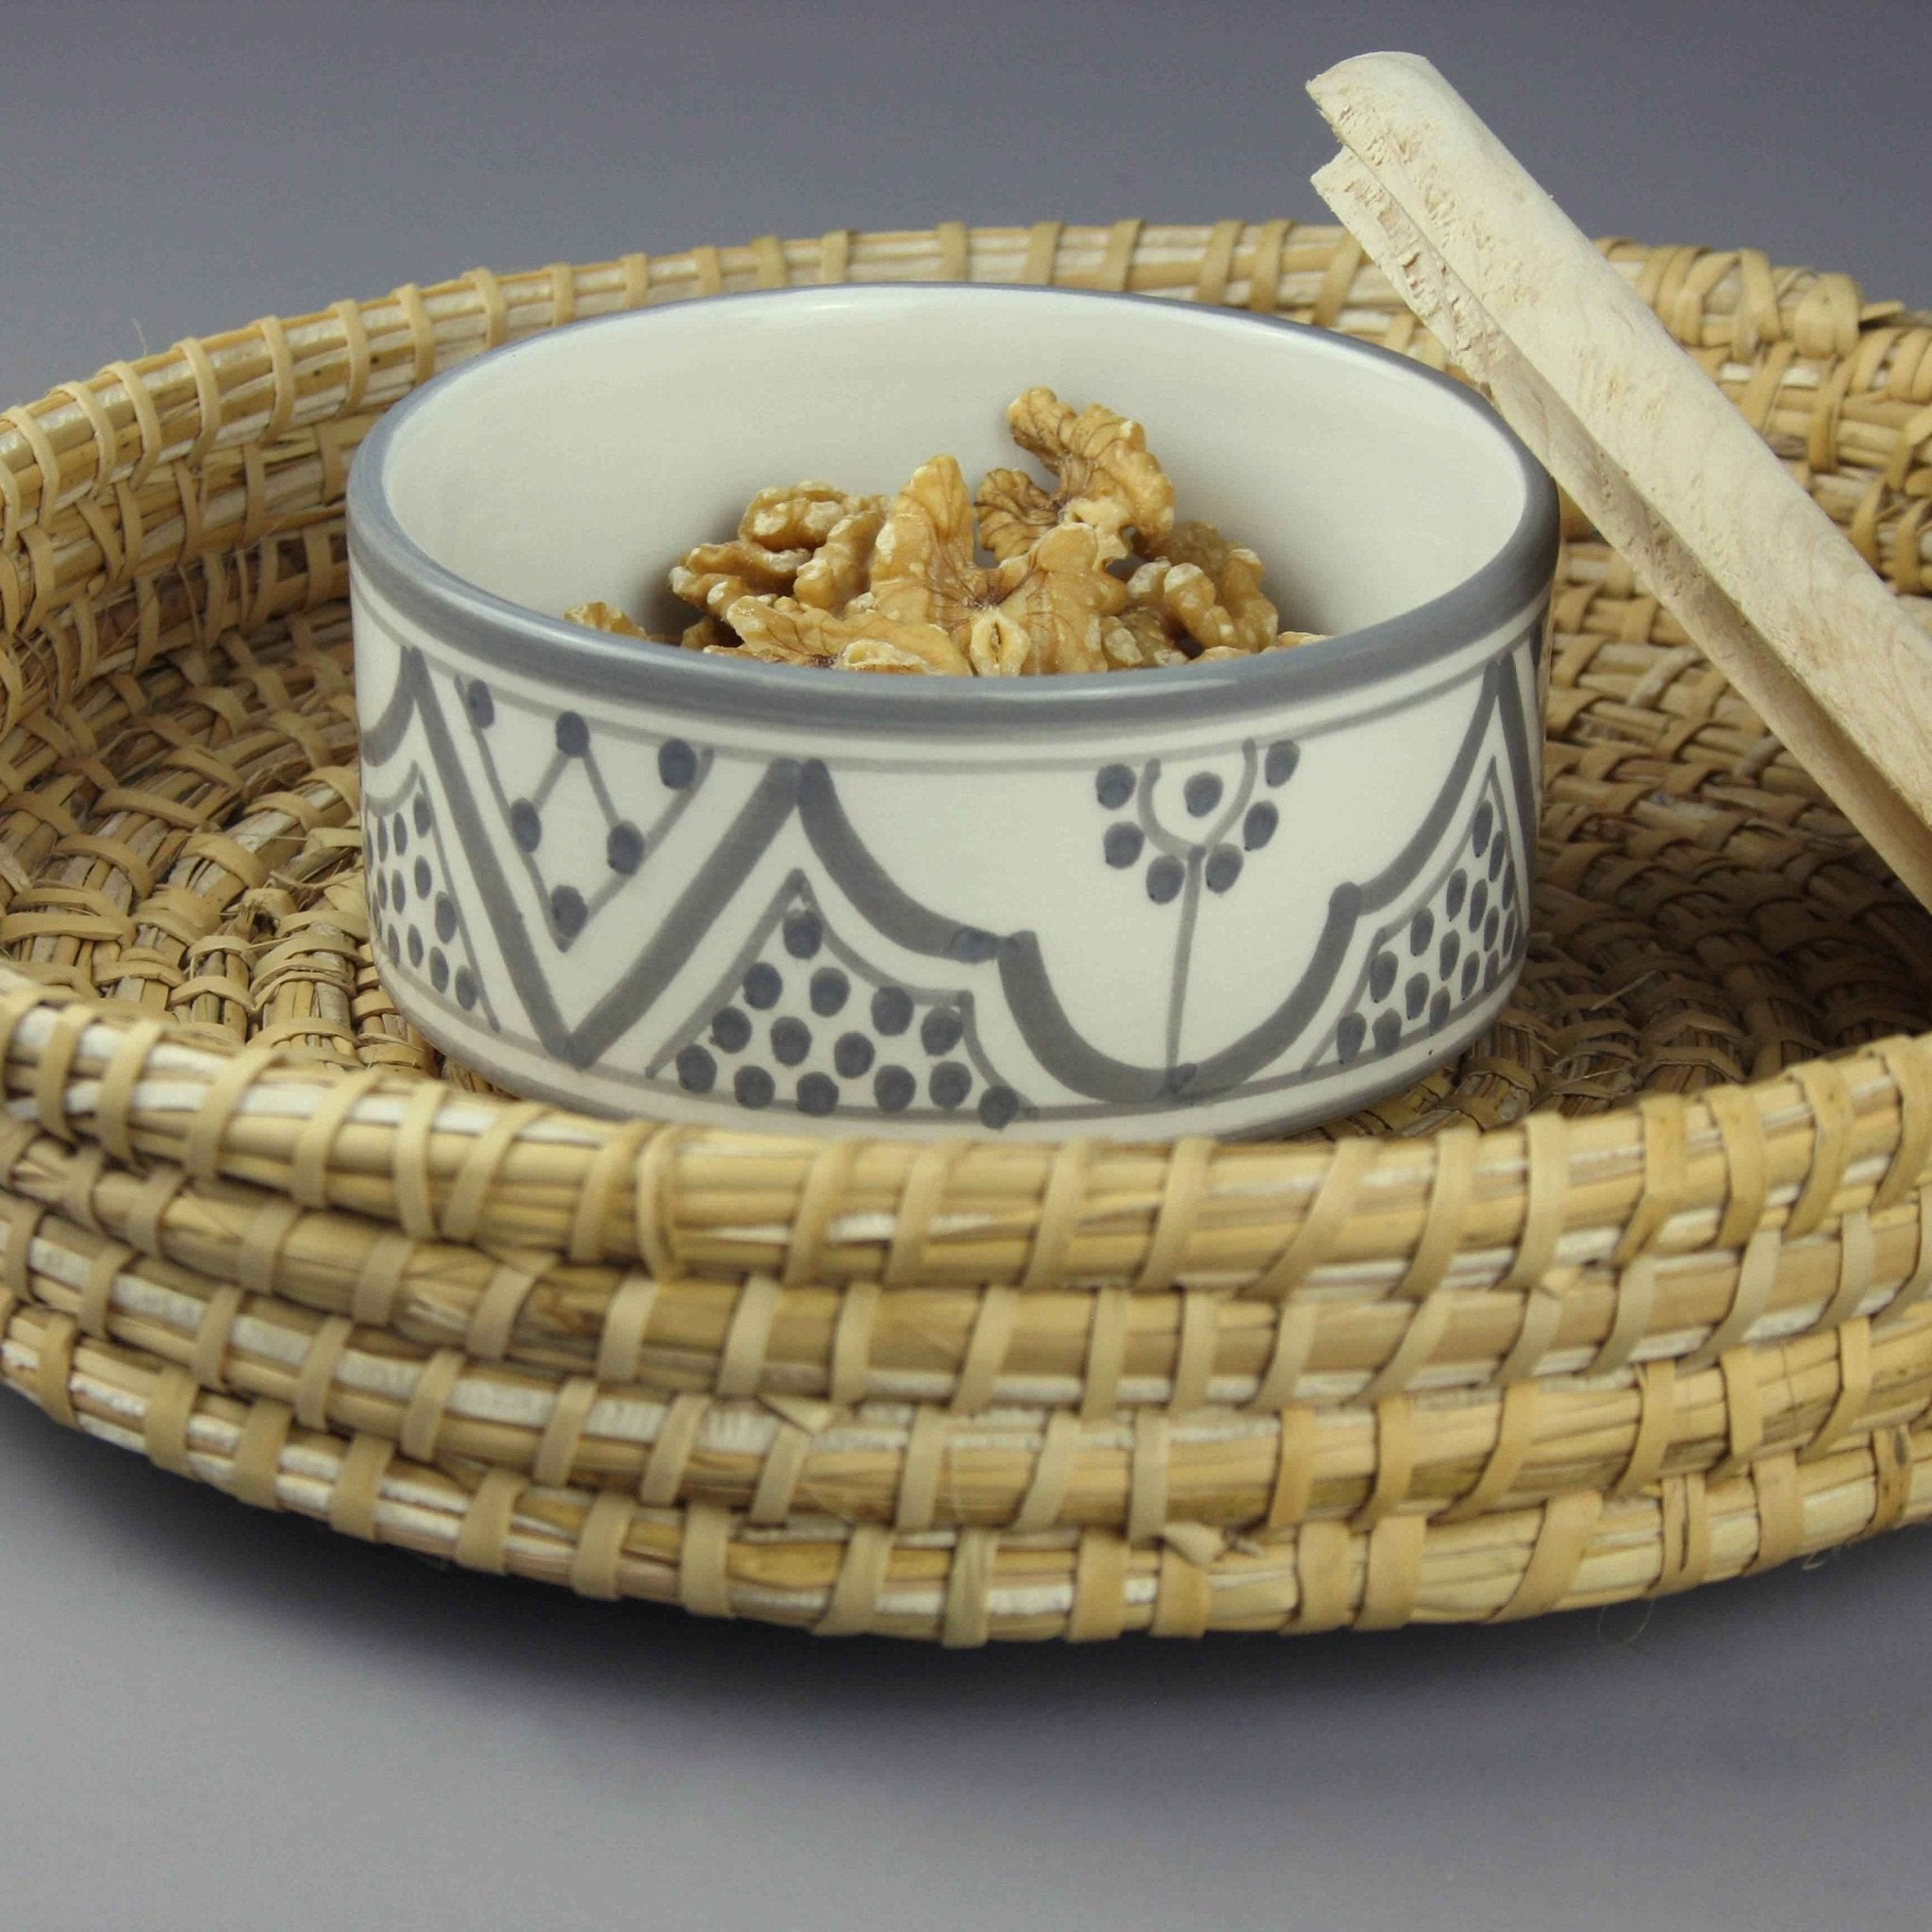 Safa Patterned Dish with wood lid - Artisan Stories